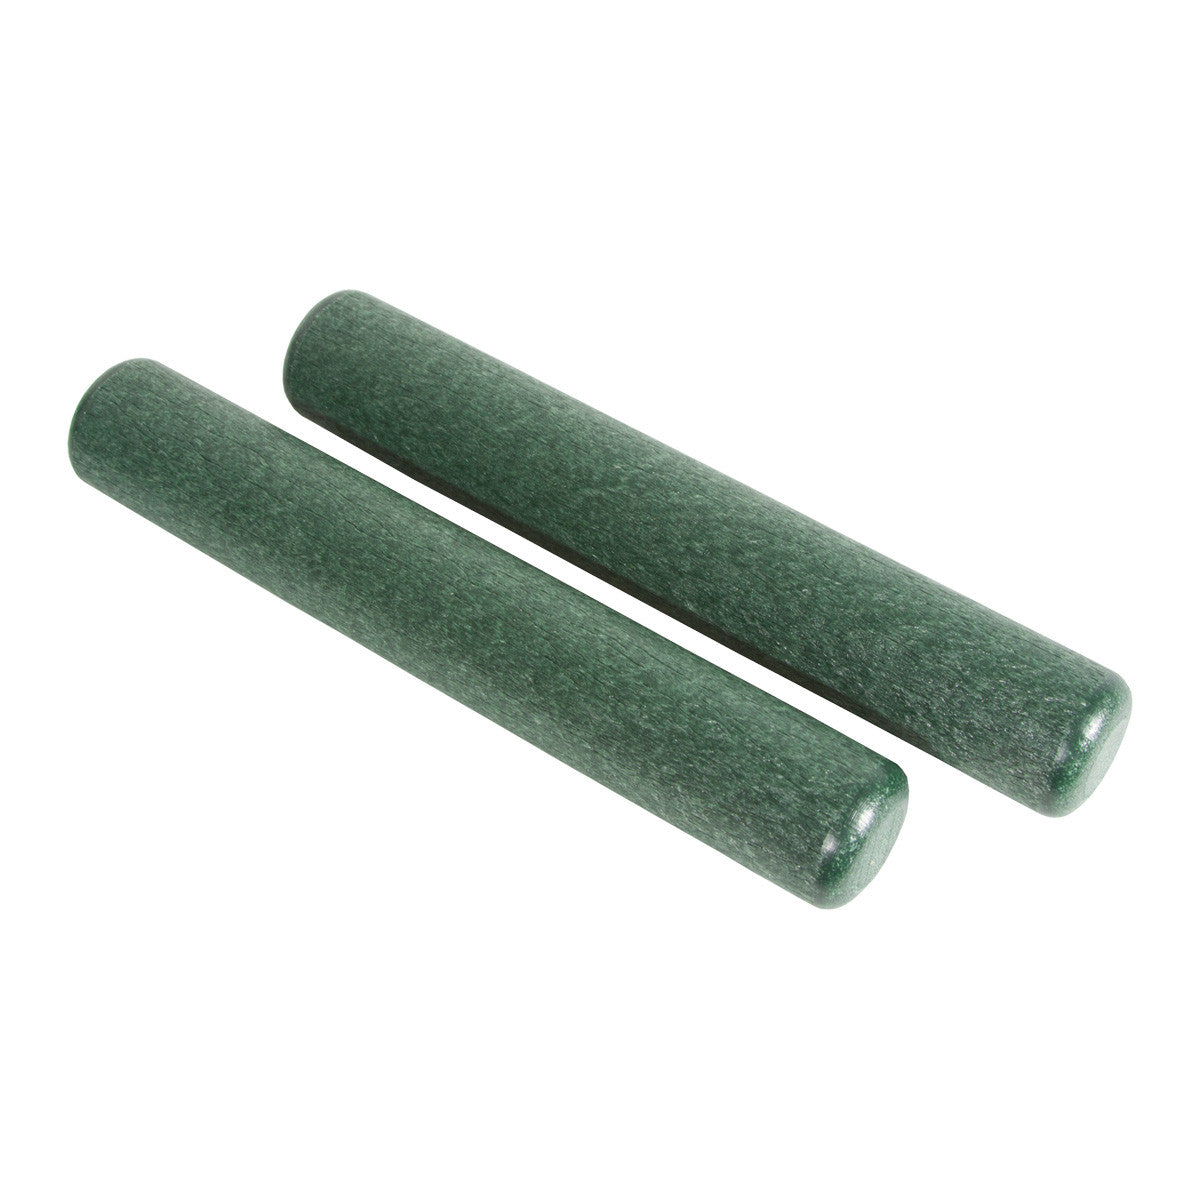 PLAYMORE DESIGN ECO RECYCLAVES (1 PAIR) - GREEN